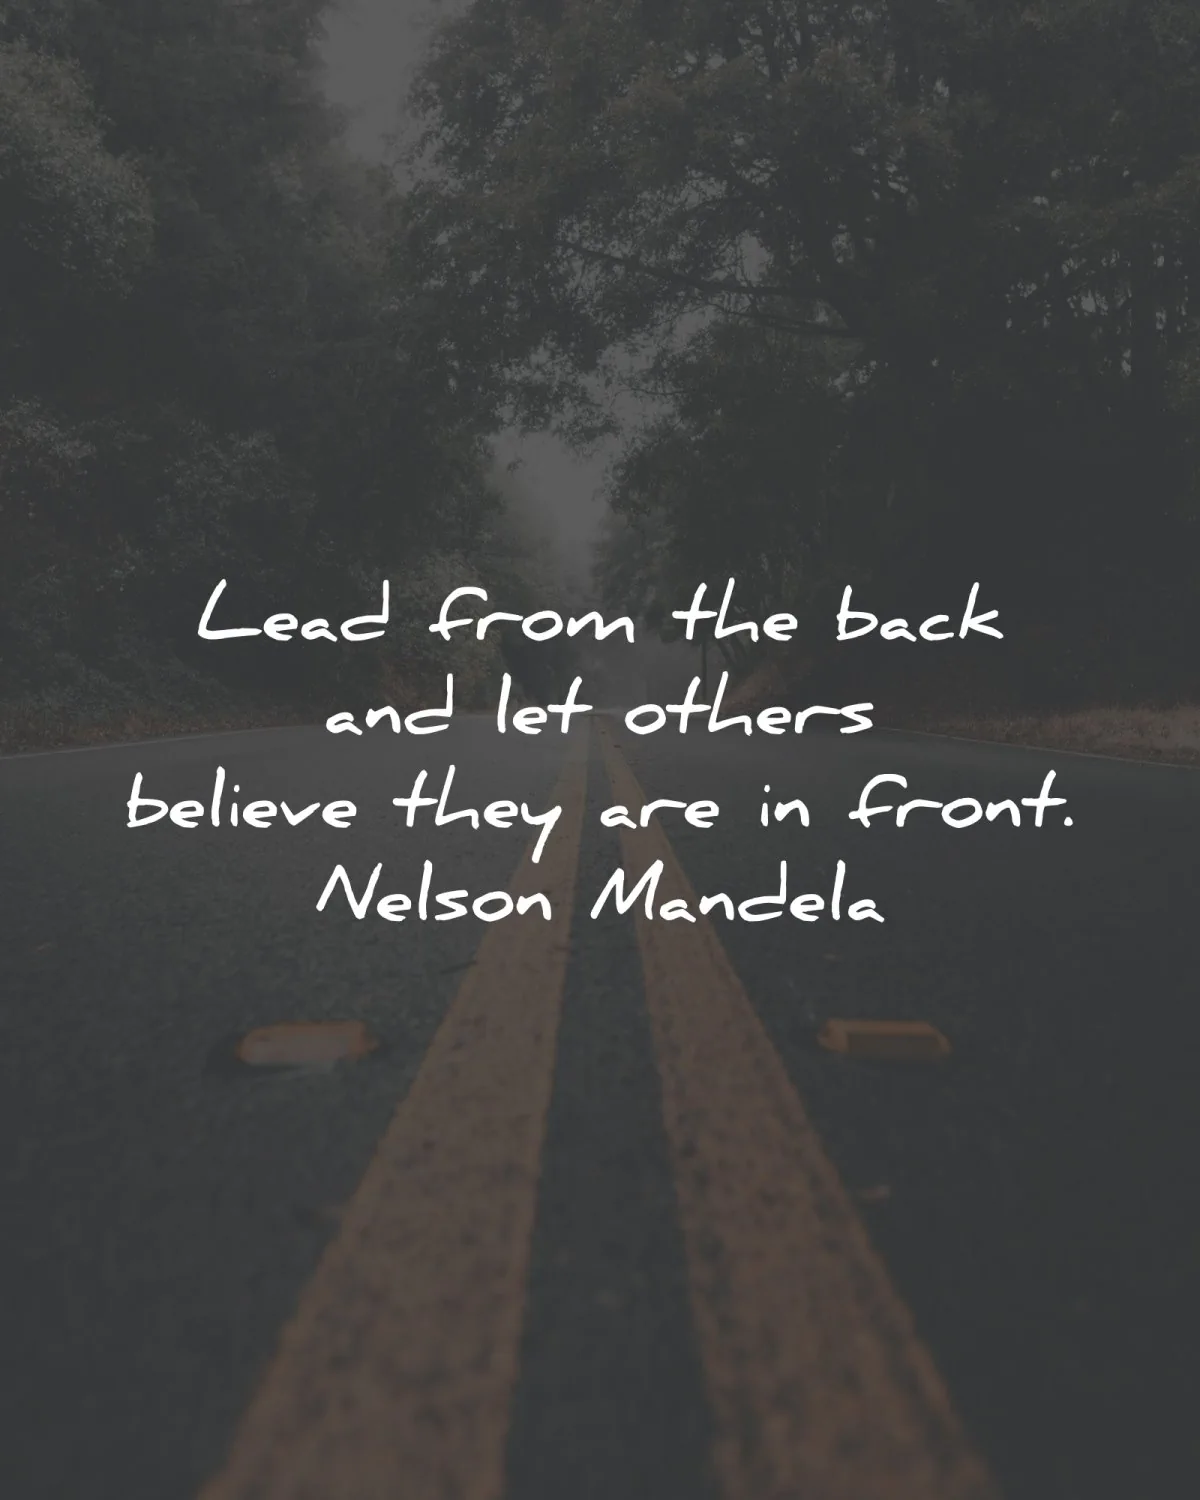 nelson mandela quotes lead from back wisdom